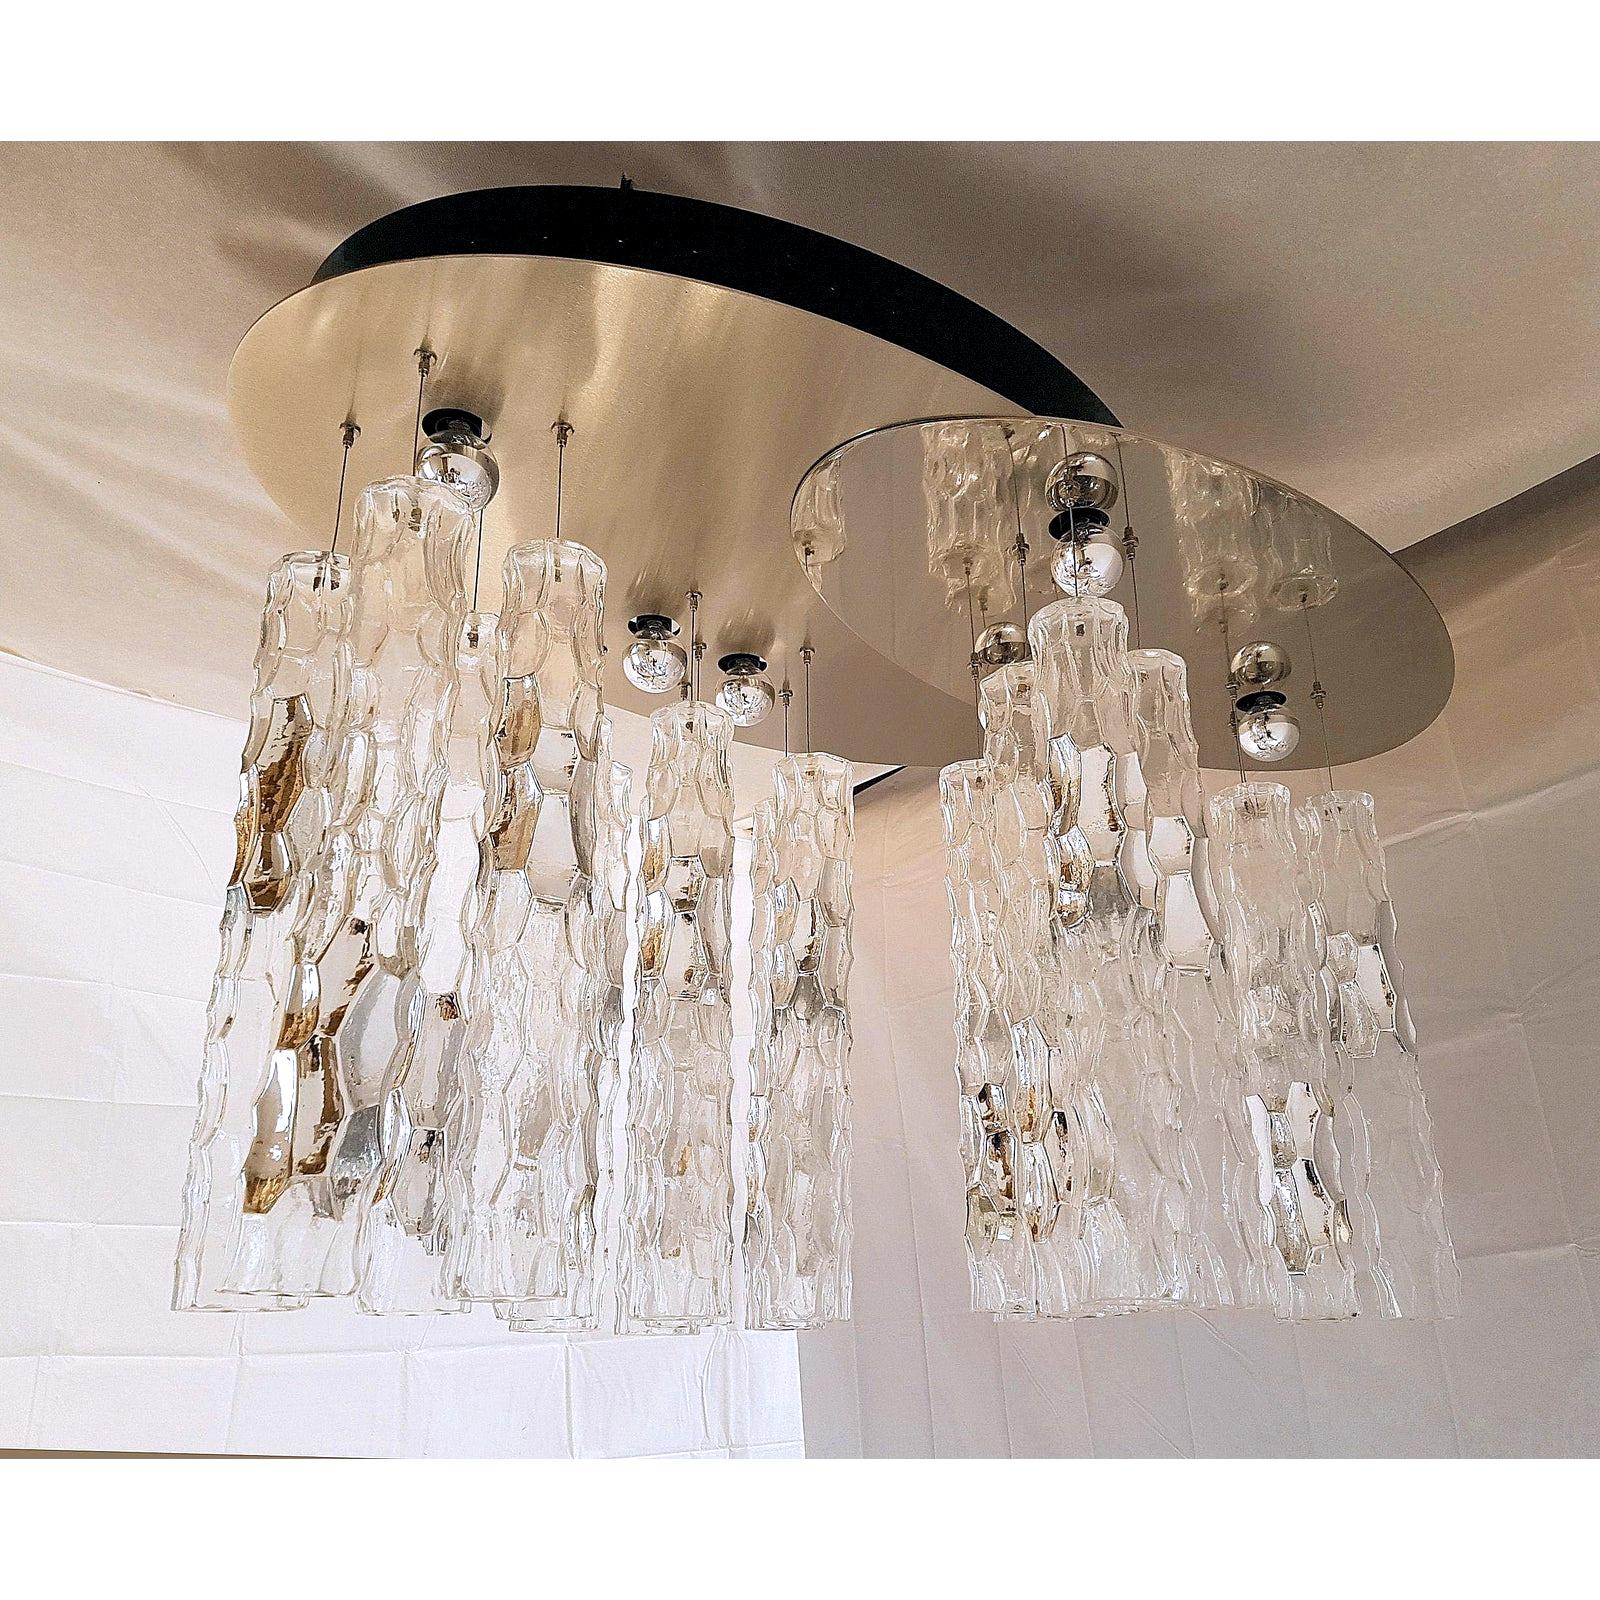 Oval shape, large Mid-Century Modern flush mount chandelier, with Murano bamboo glass pendants, by AV Mazzega, 1970s.
The ceiling plate is made of mirrored chrome, and brushed steel, composing a unique oval shape.
The vintage chandelier has Murano